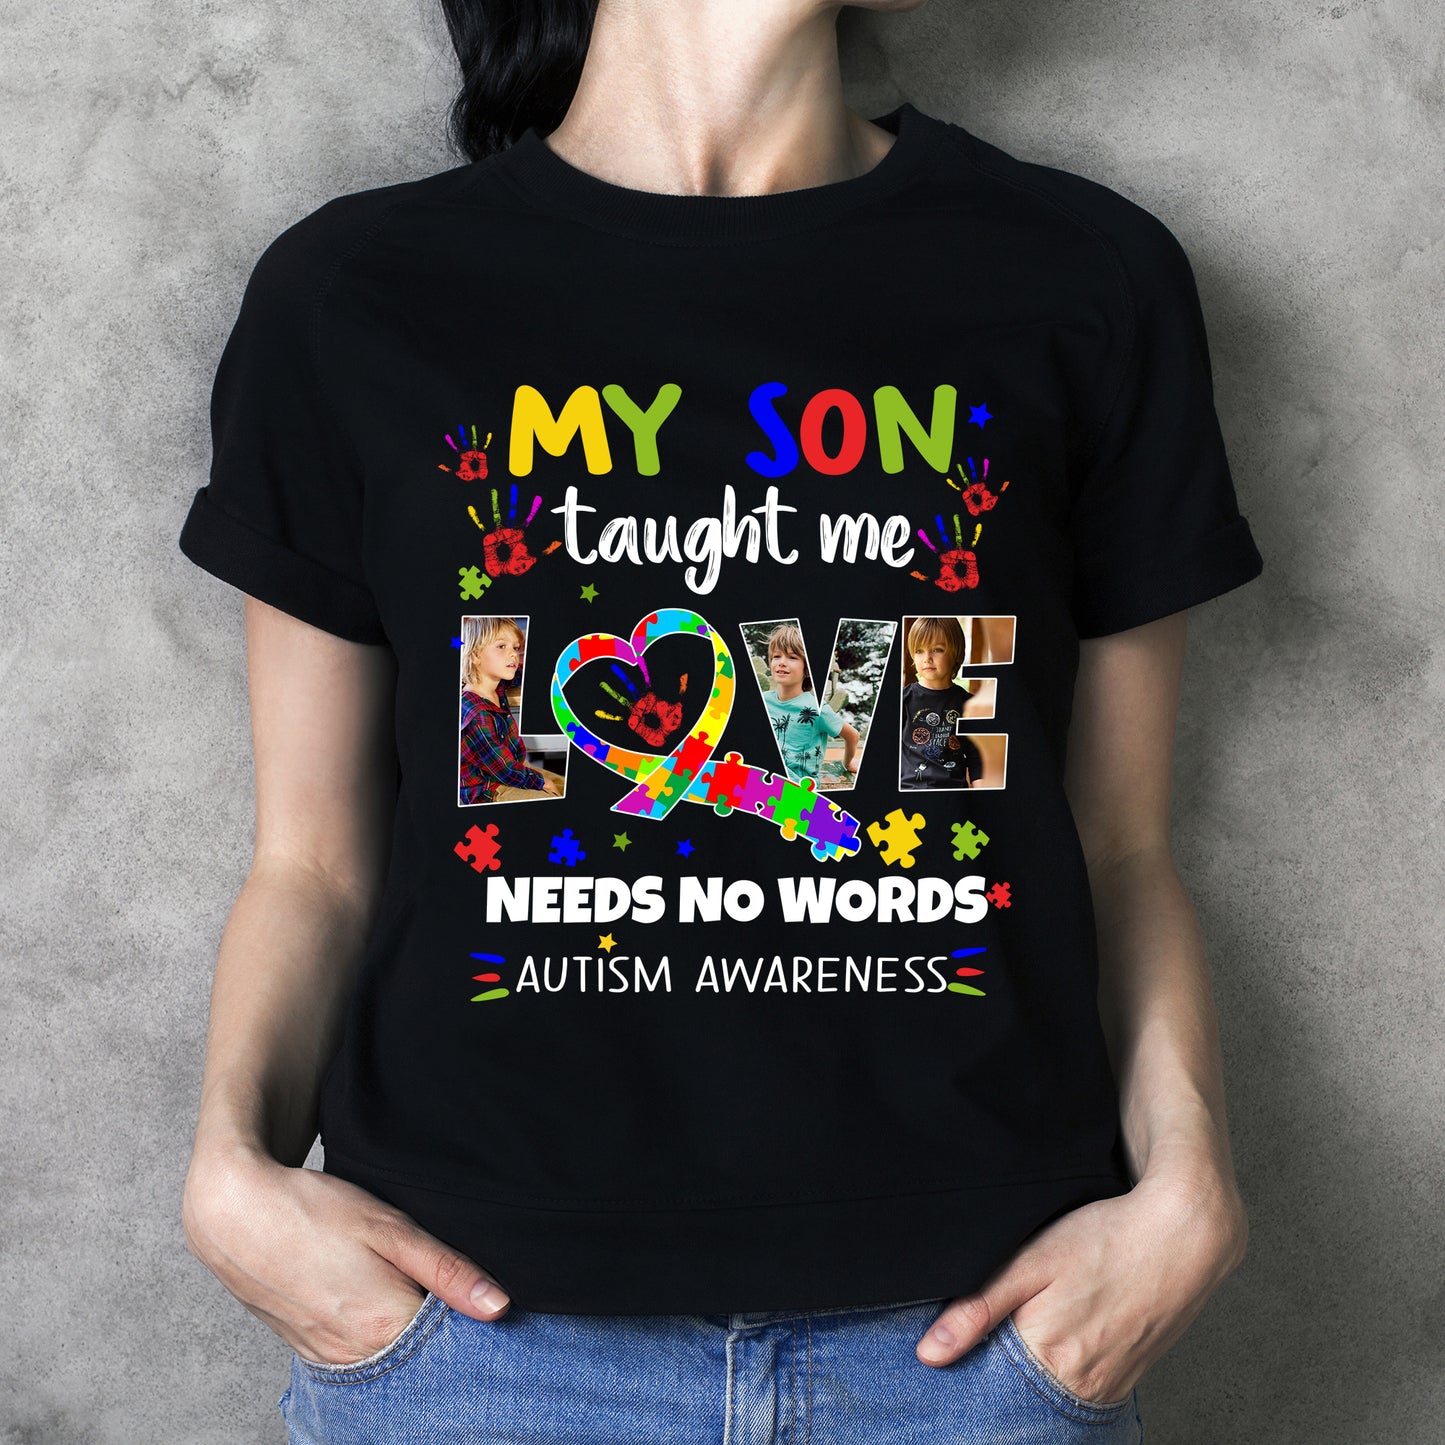 Custom personalized photo T shirts printing Mother's day gifts idea, pictures on tee, Christmas, birthday presents for mom - Autism Love Needs No Words - PersonalizedWitch